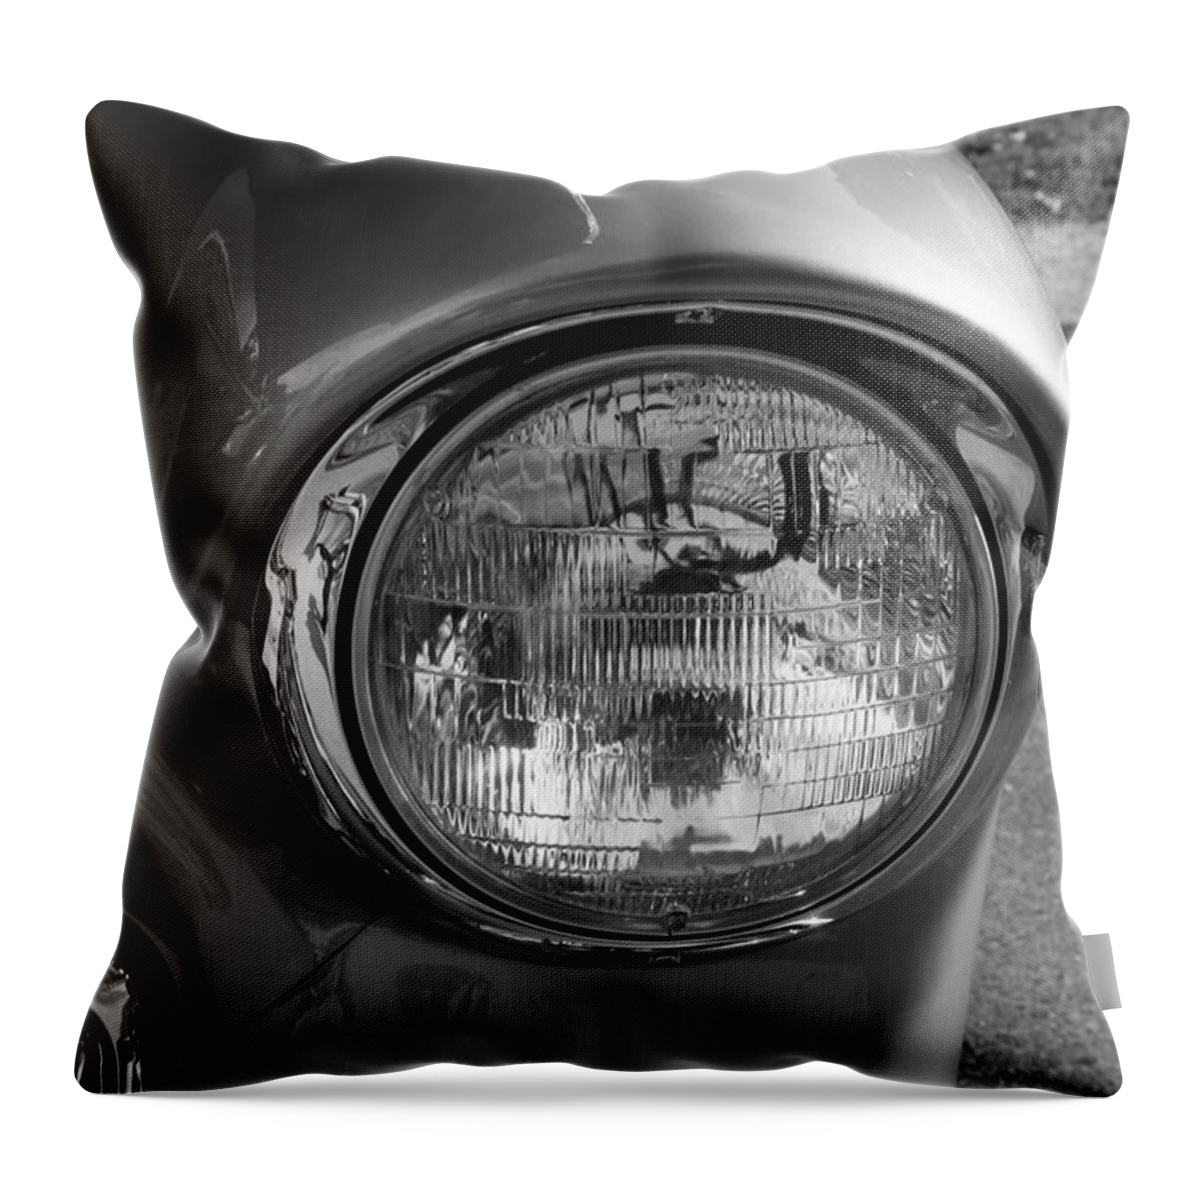 1955 Throw Pillow featuring the photograph 55 Chevy Headlight Grayscale by Jennifer White